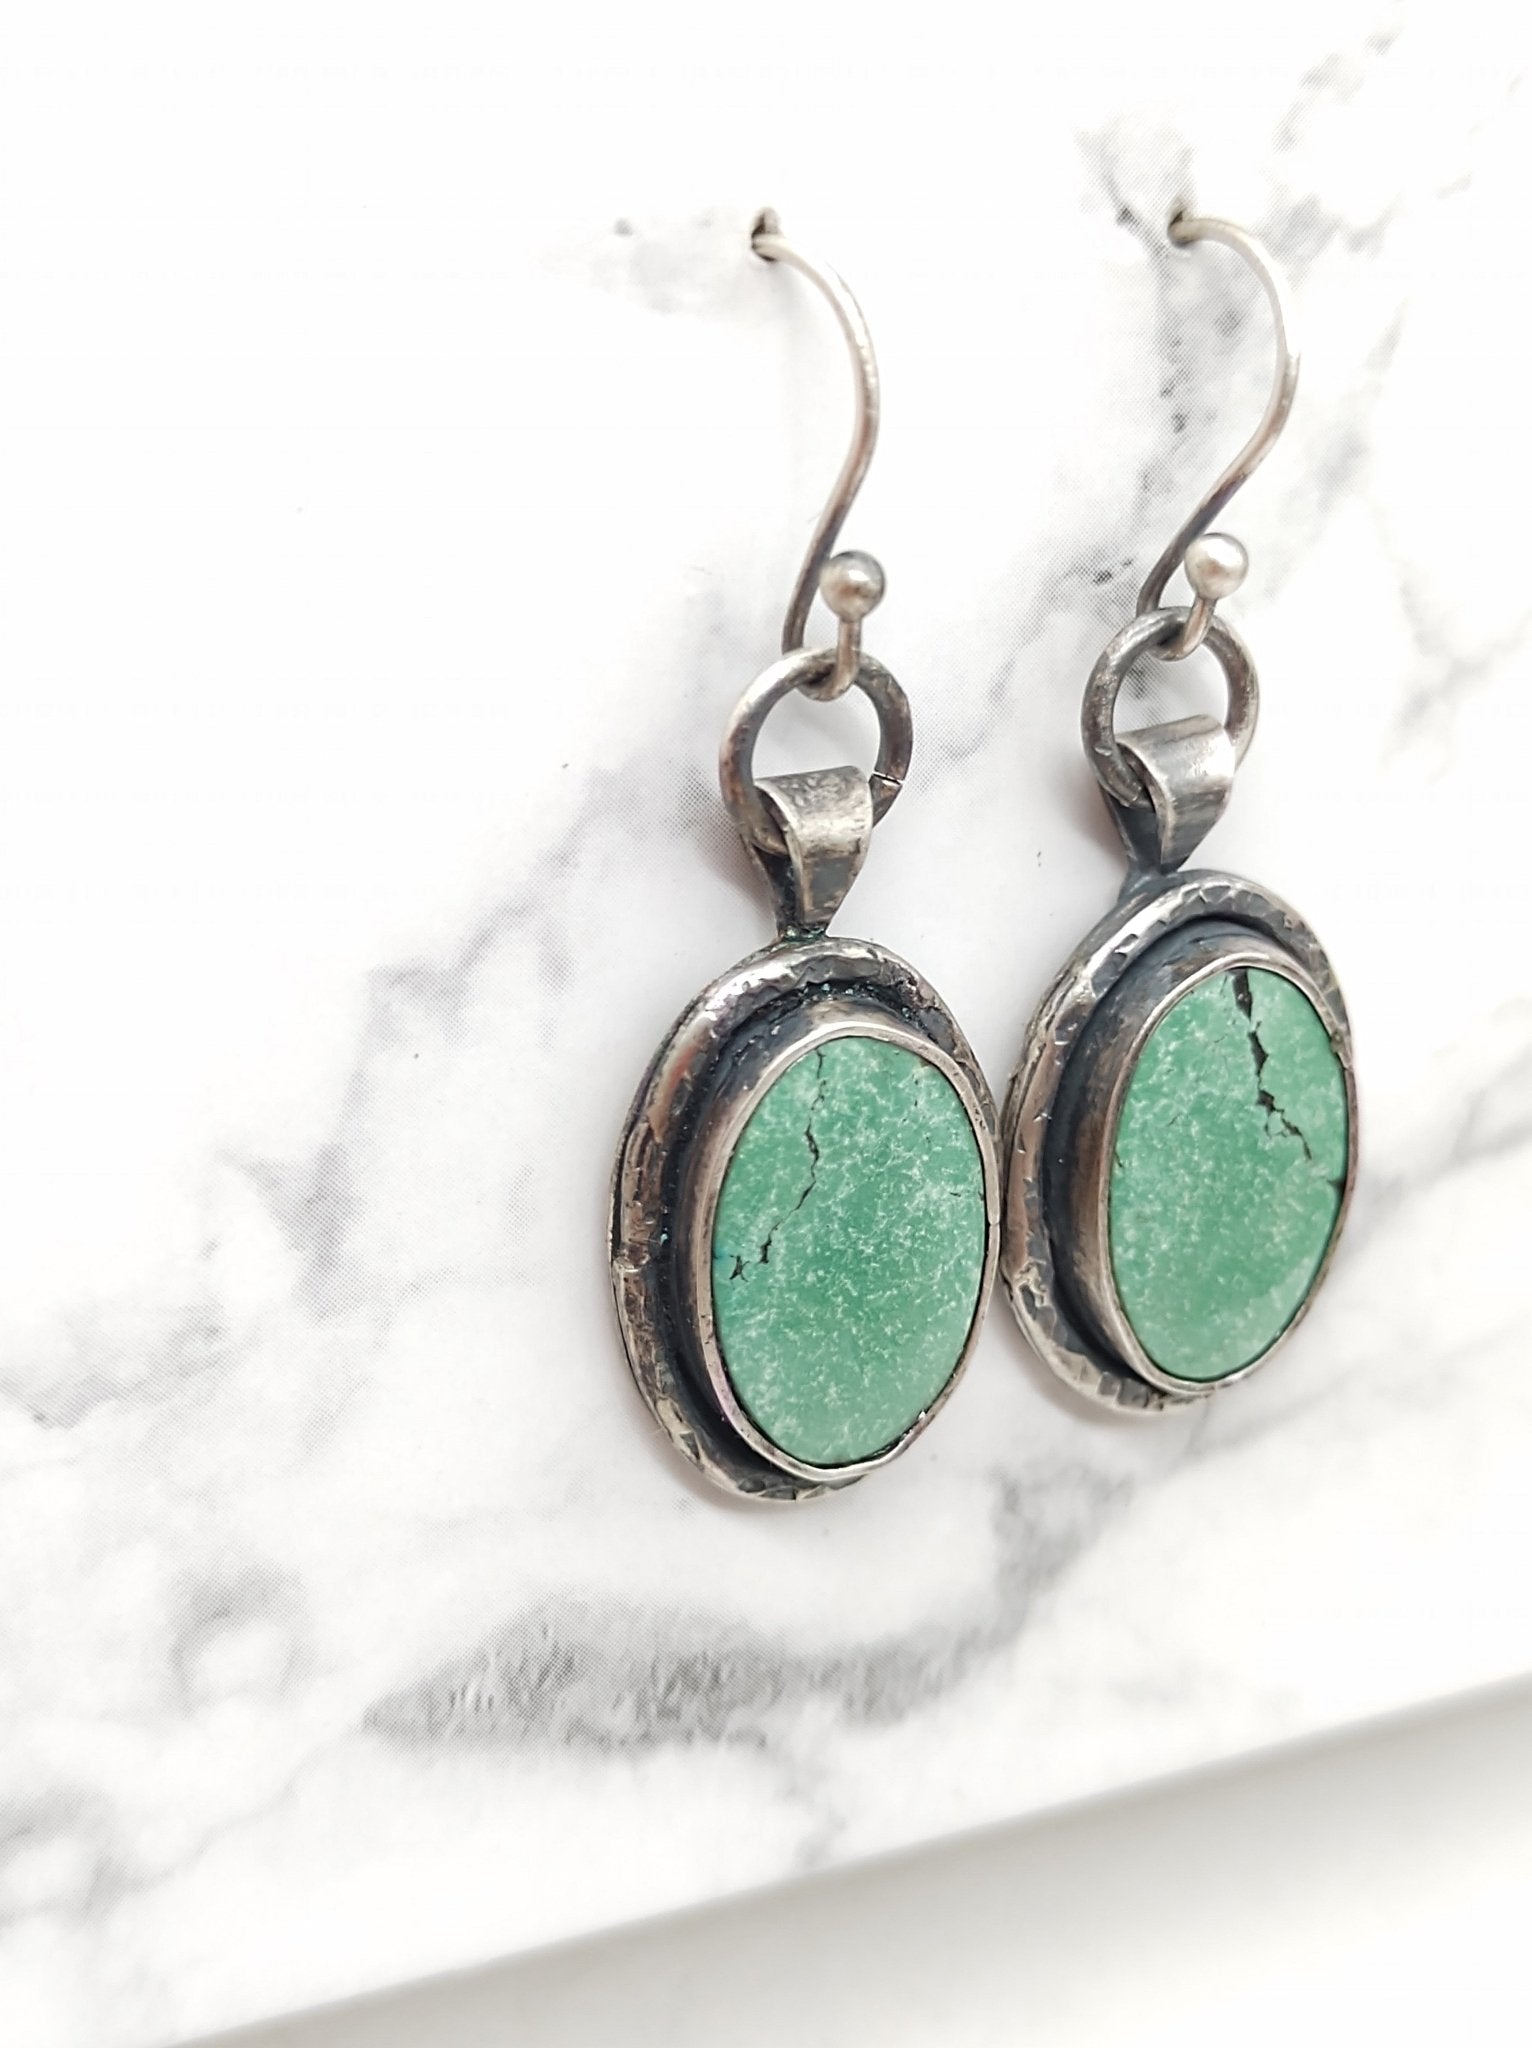 Turquoise Silver Dangle Earrings with American Turquoise Earrings by Folks On The Edge - Folks On The Edge